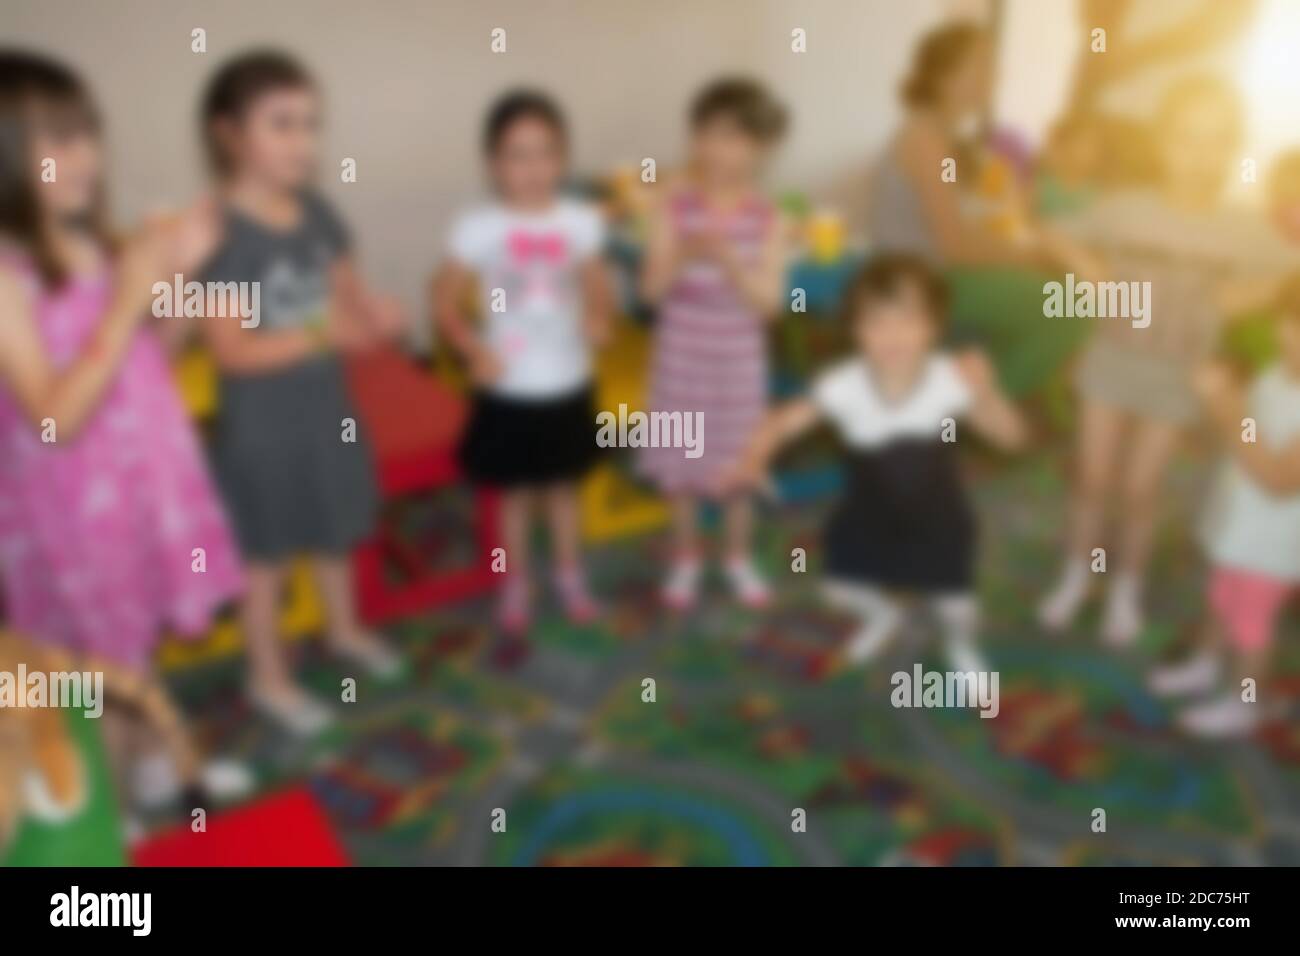 Dancing kids at birthday party in kindergarten. Blurred image for background use. Stock Photo